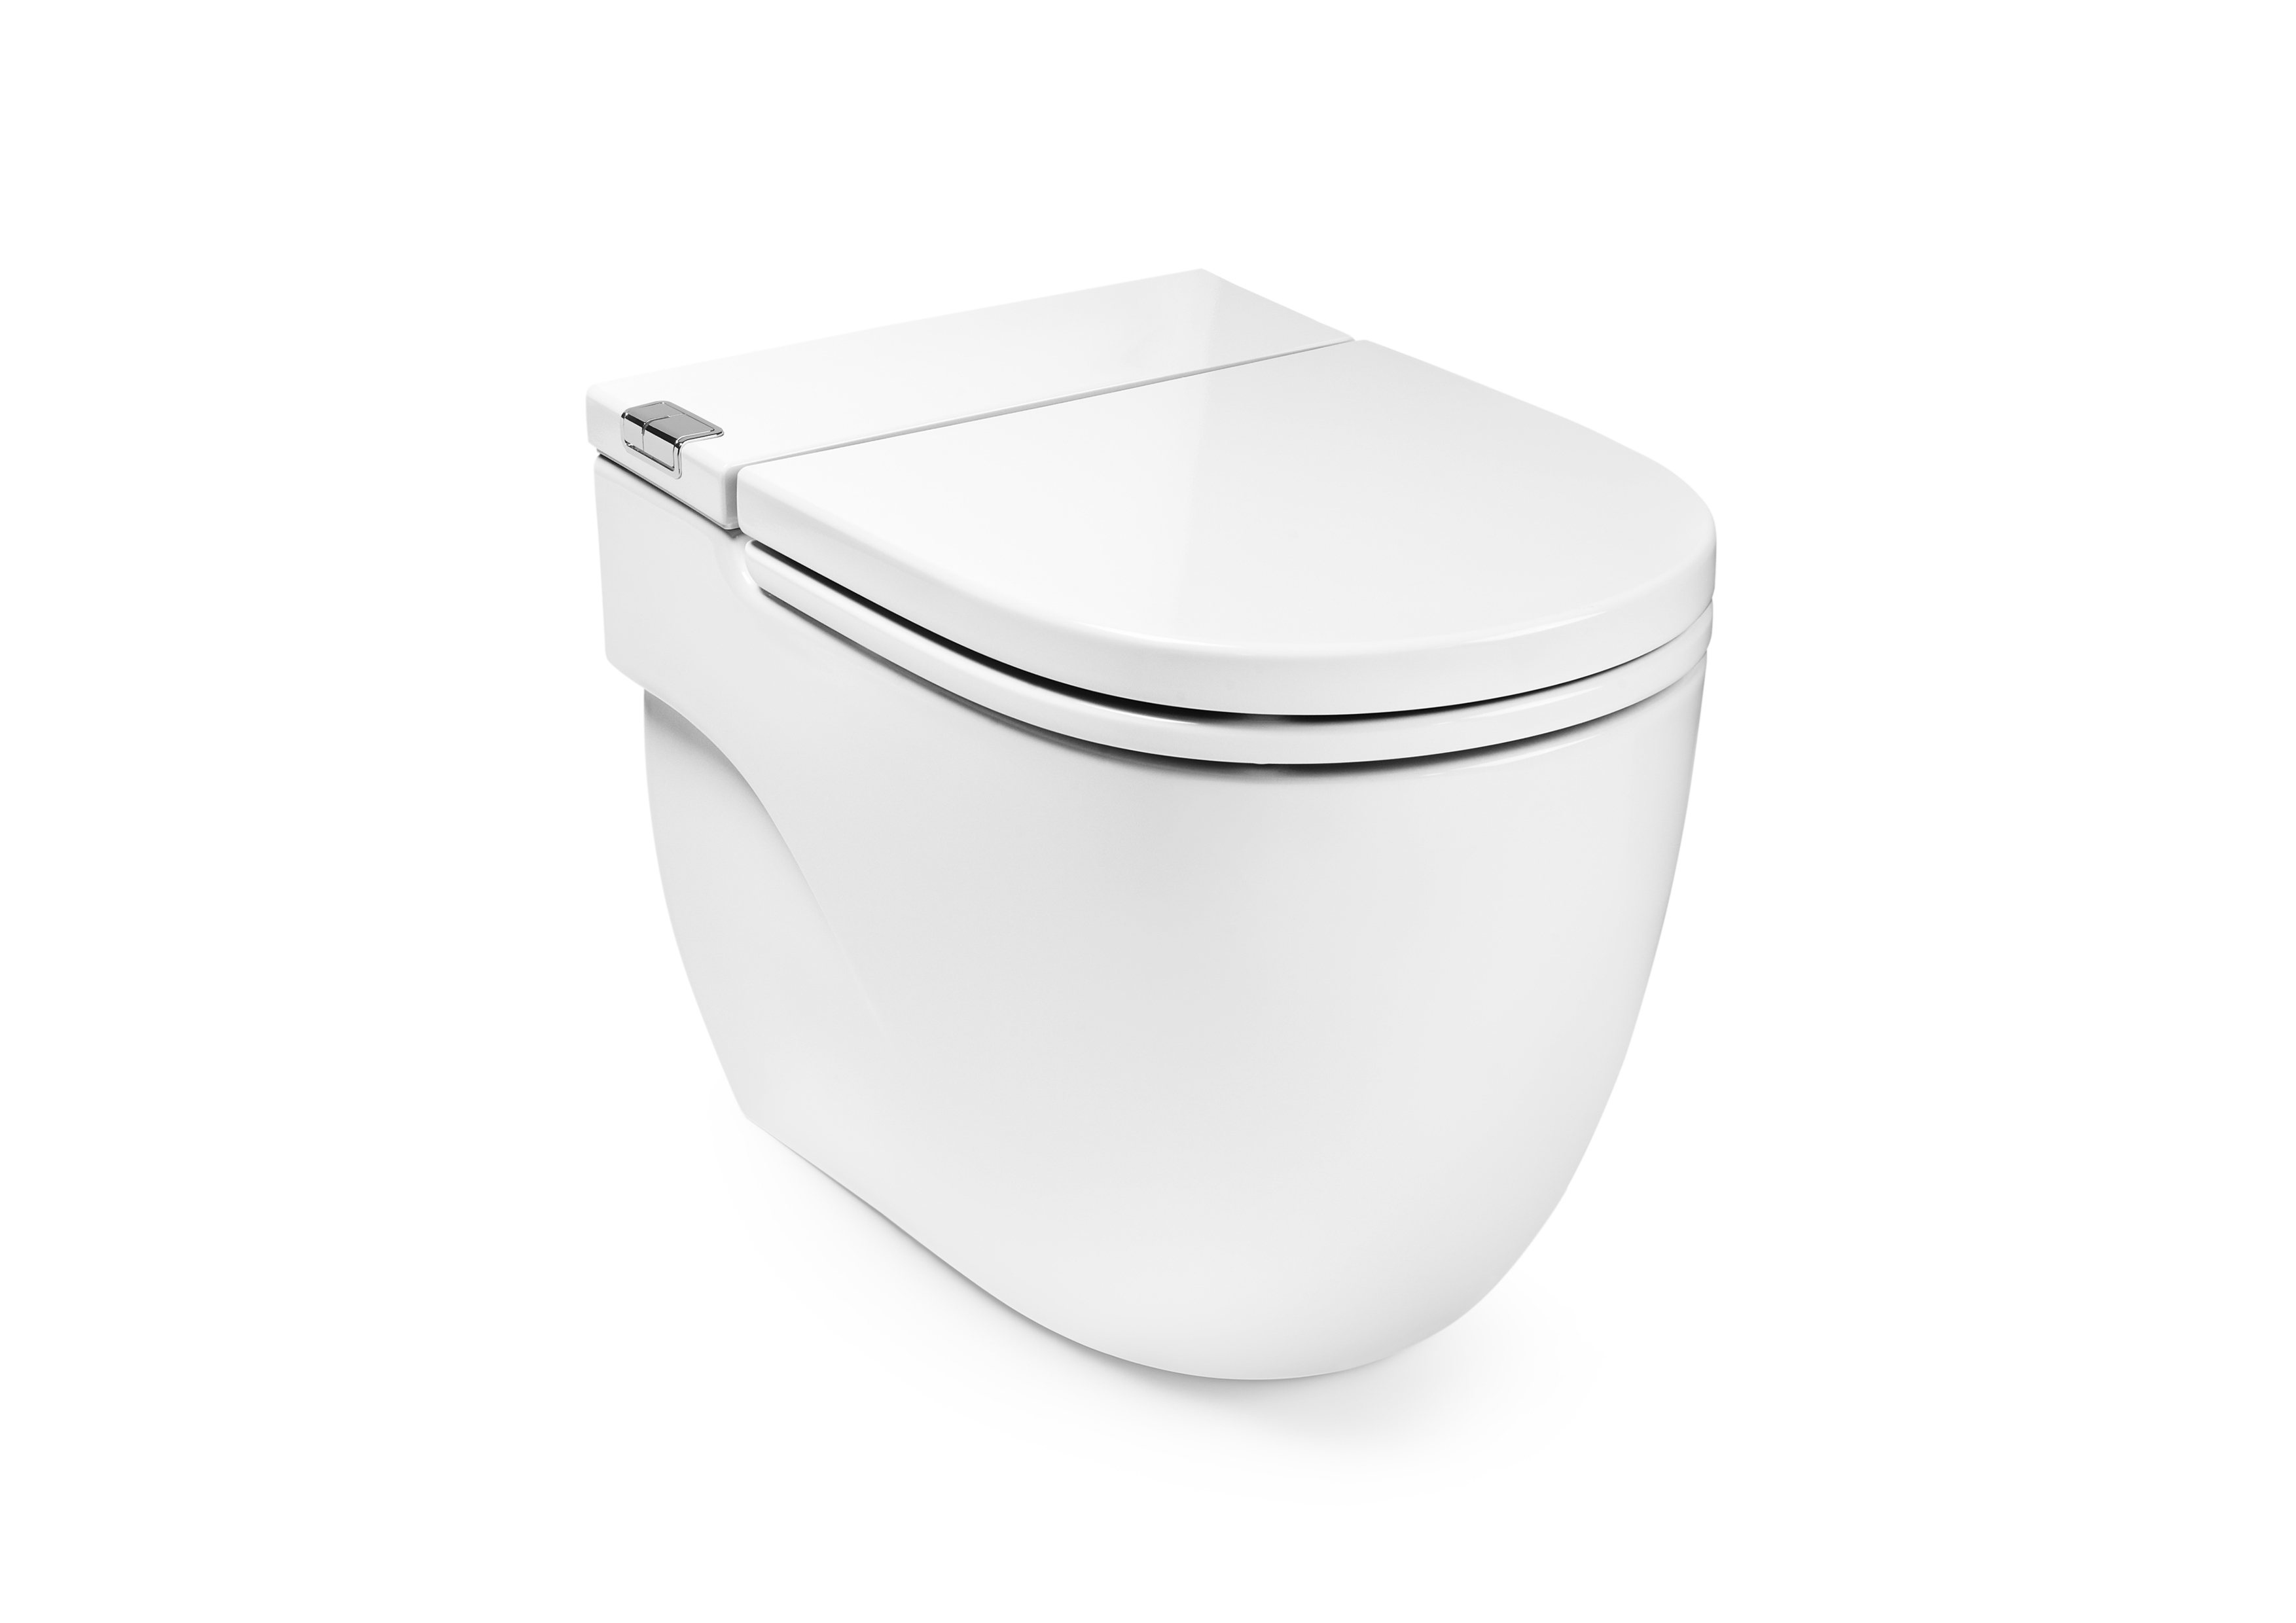 Floor basin with built-in cistern. Includes seat with cover. Pow